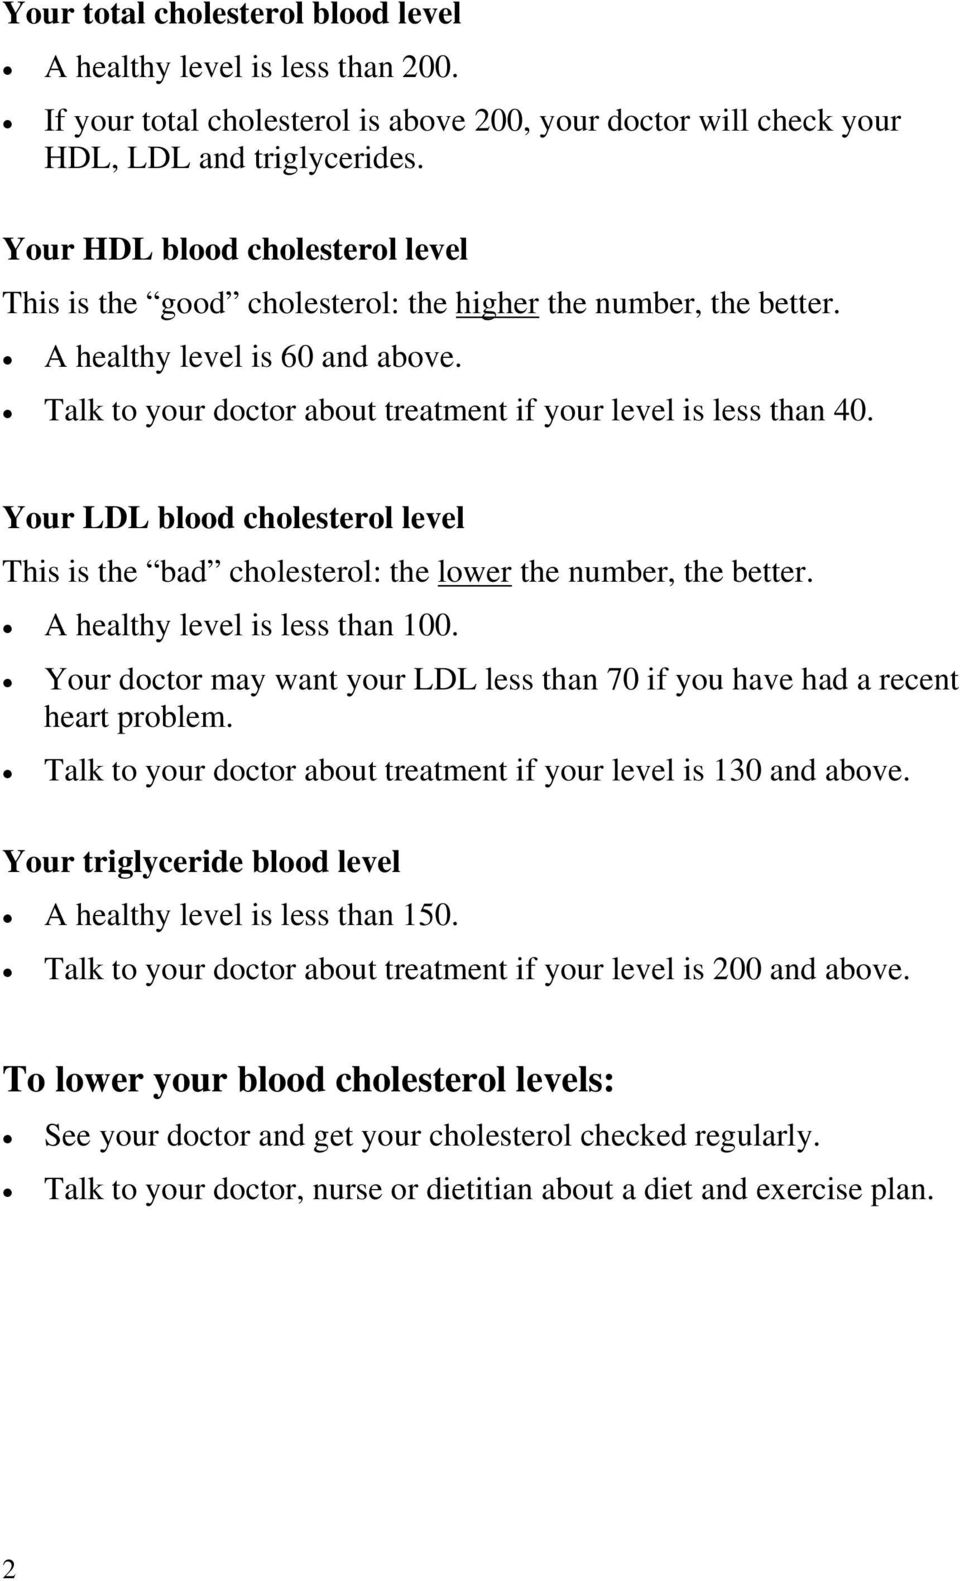 Your LDL blood cholesterol level This is the bad cholesterol: the lower the number, the better. A healthy level is less than 100.